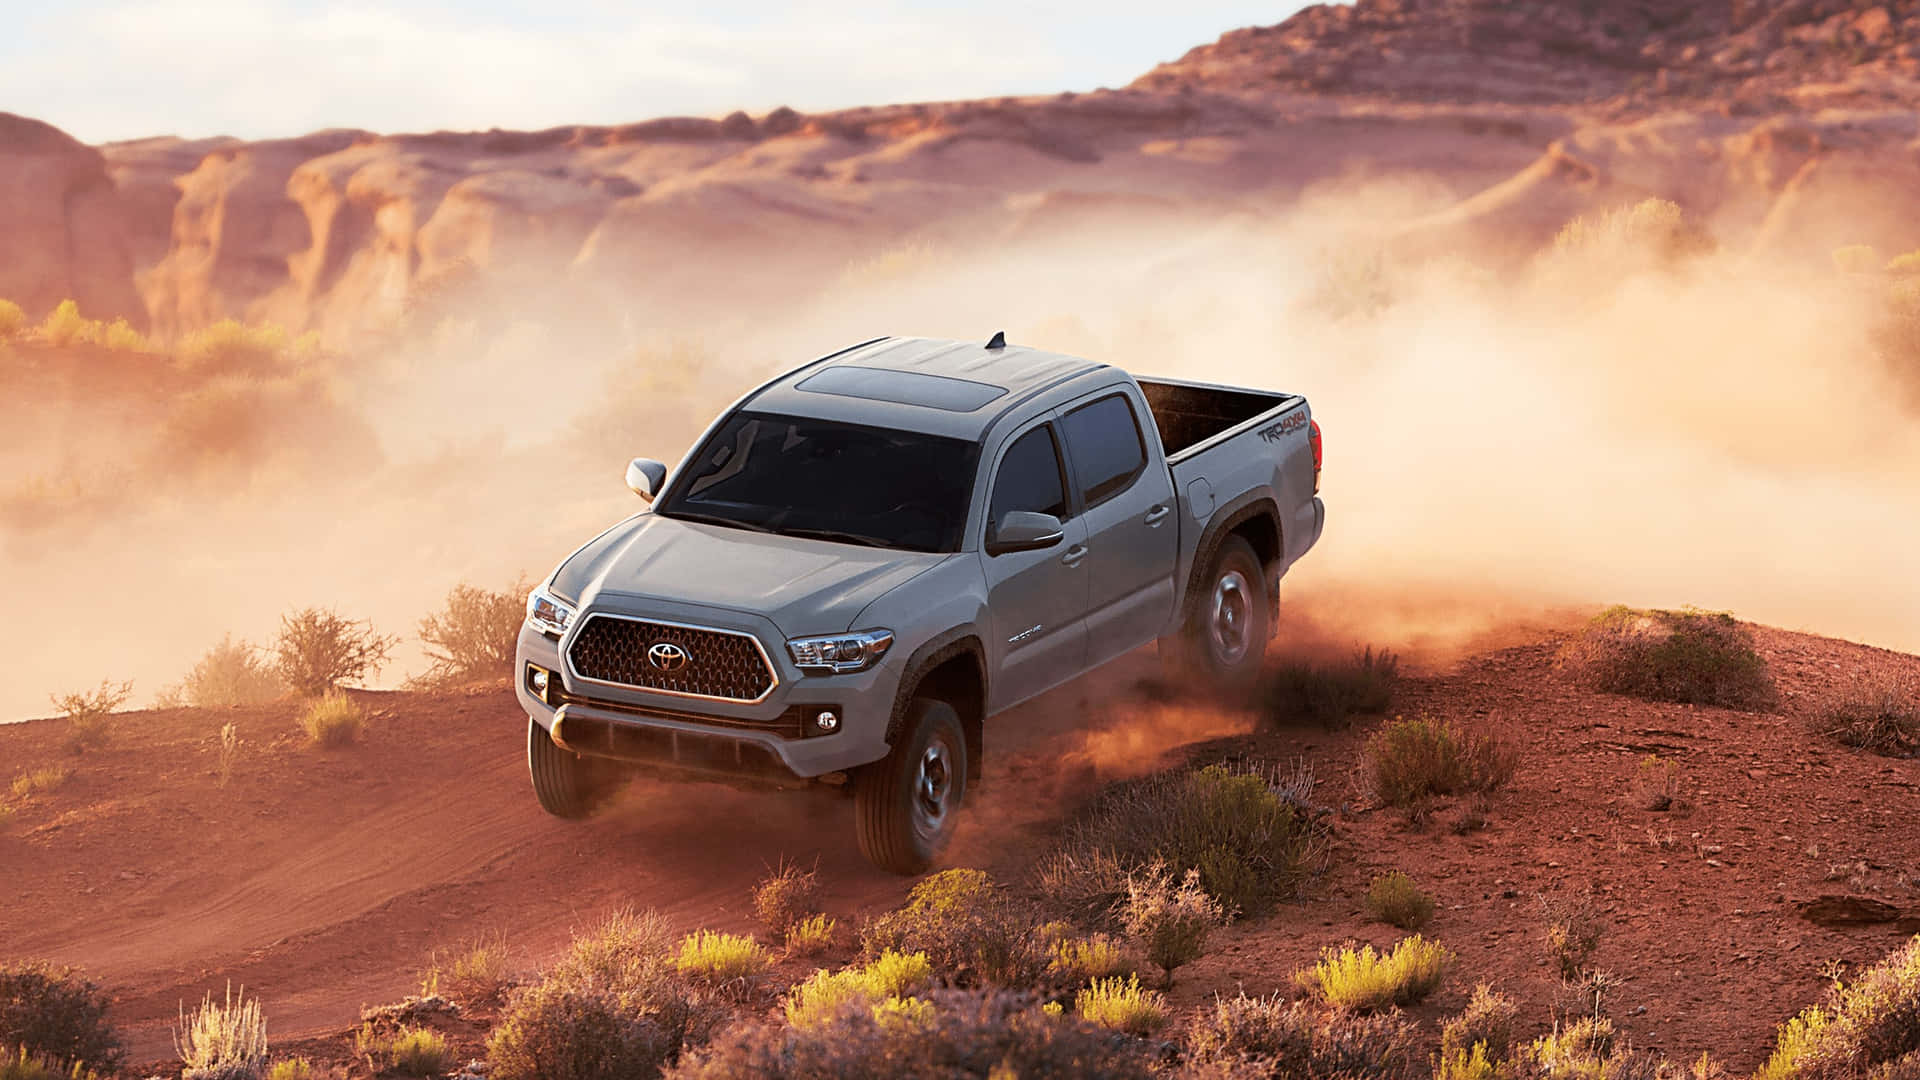 Conquer the Road with the New Toyota TRD Wallpaper